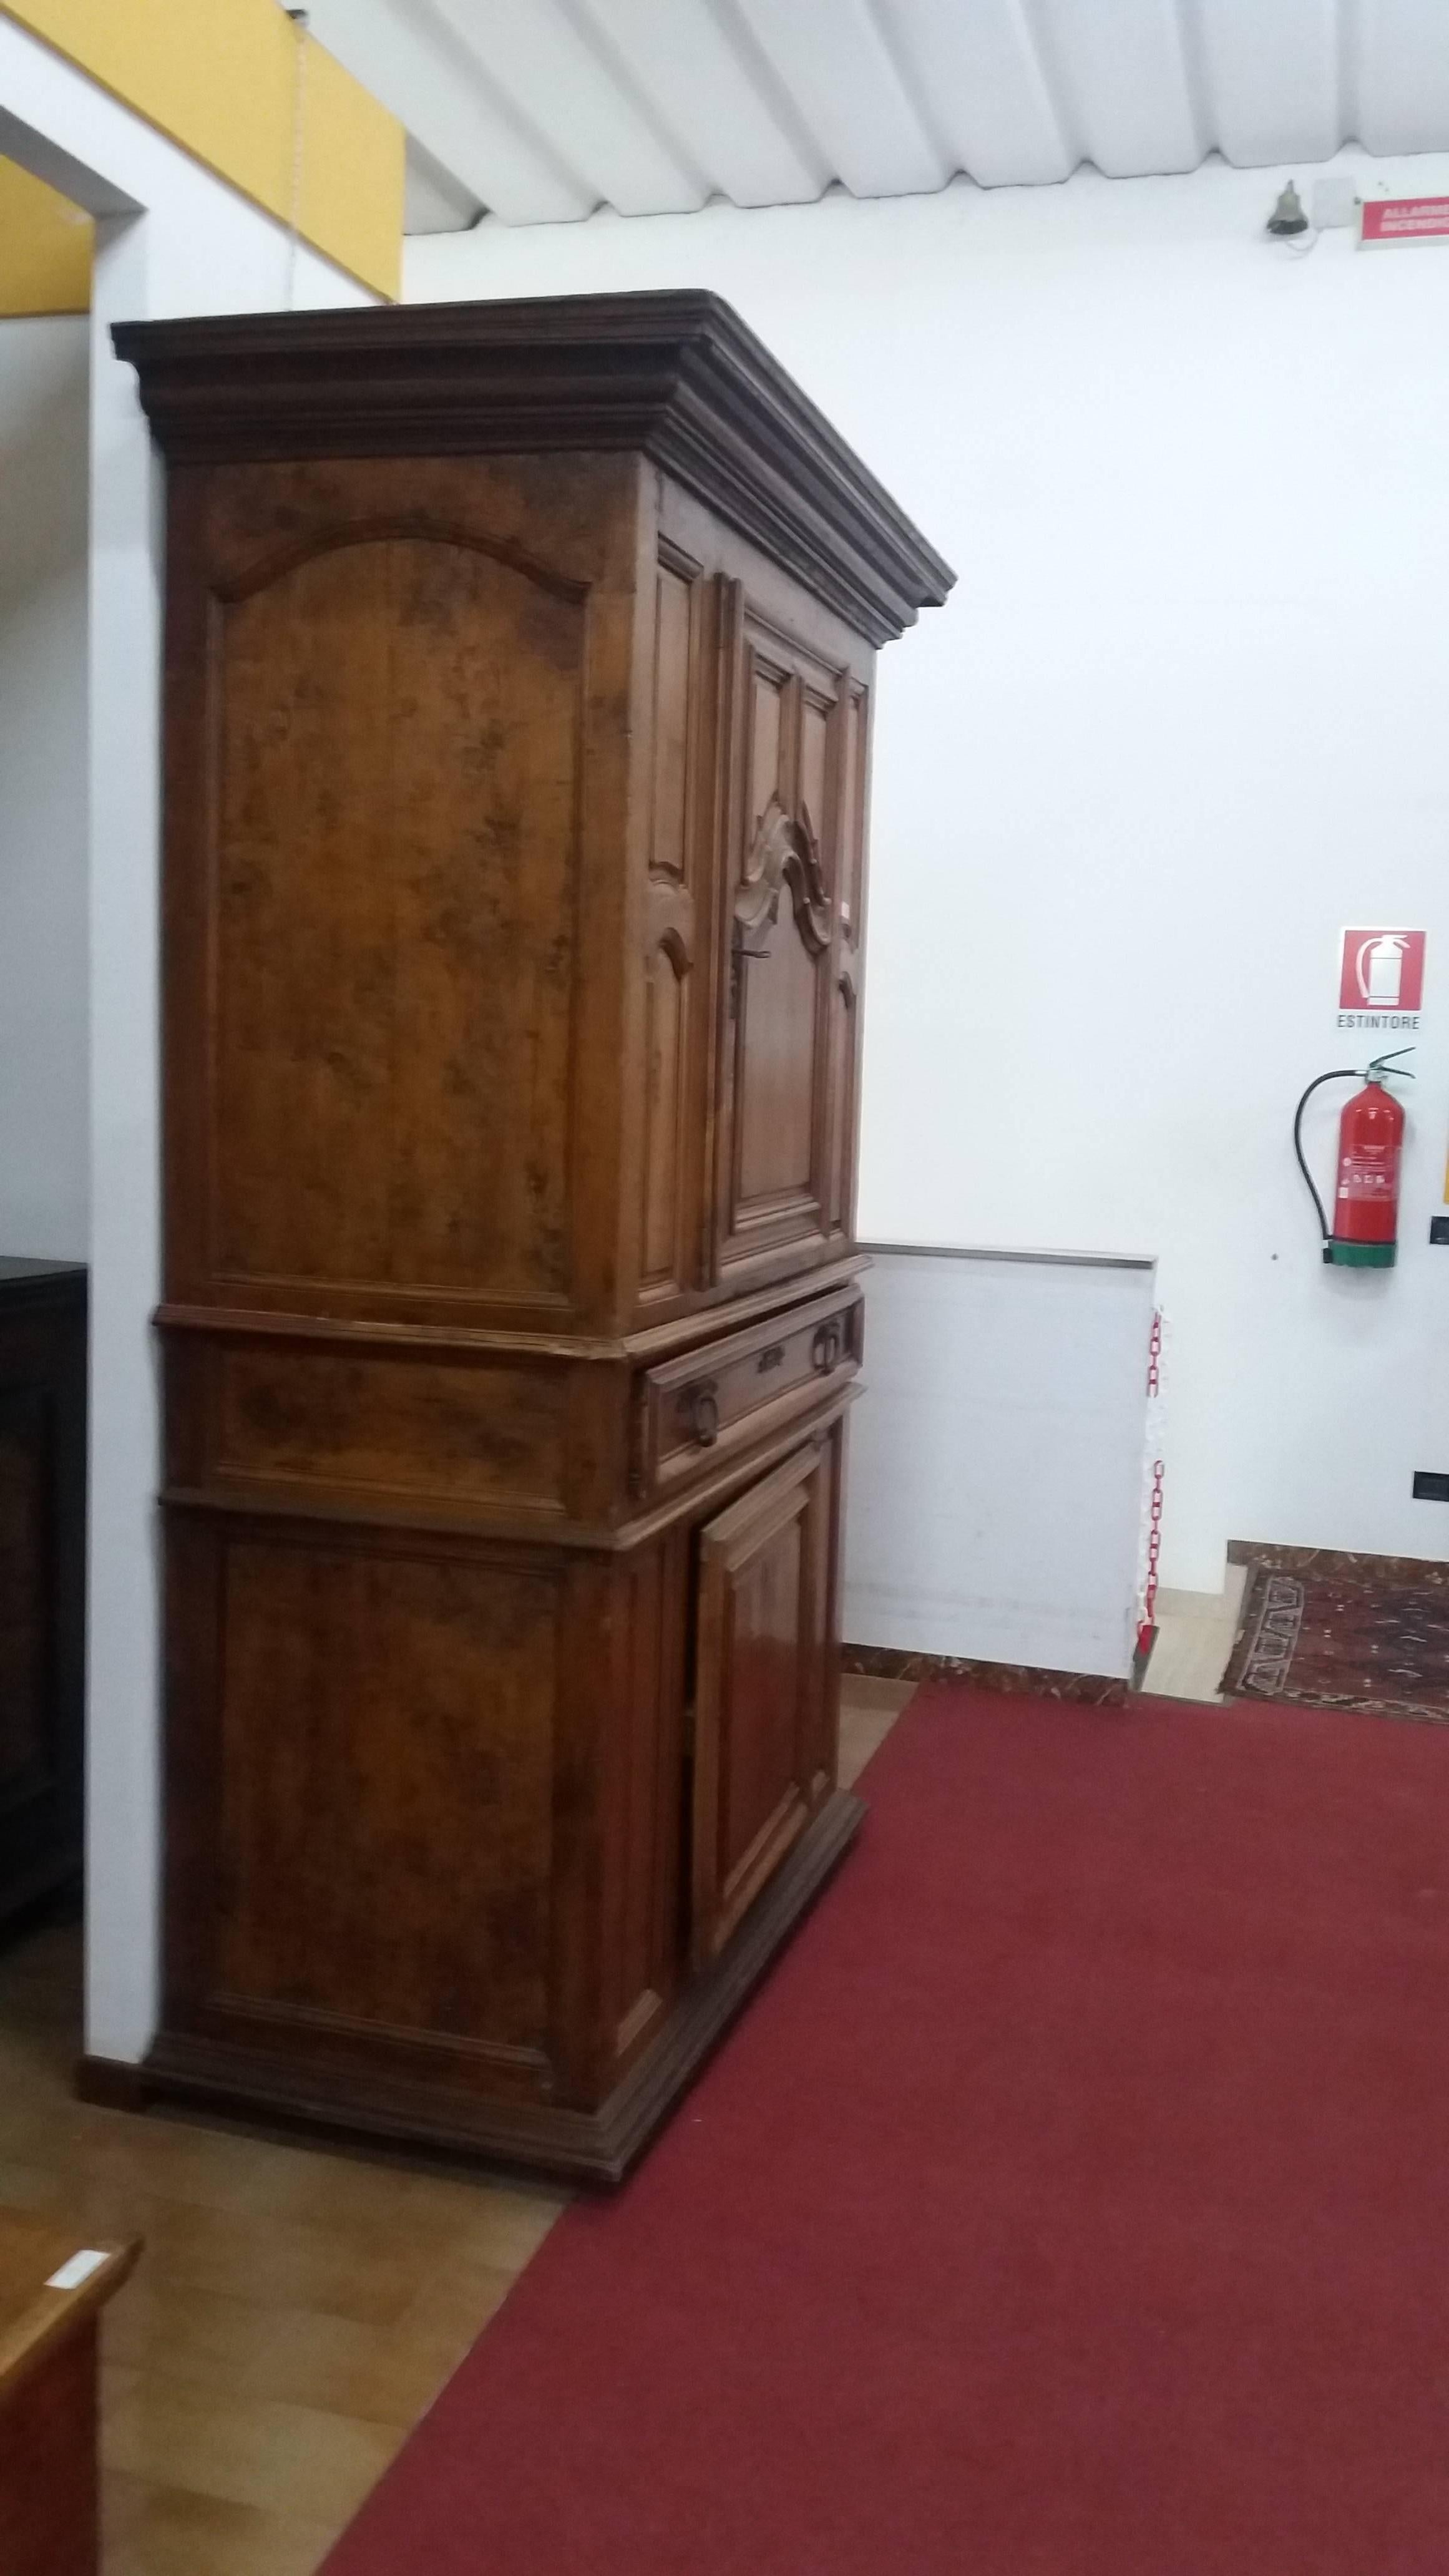 This is an cherry carved cabinet from Toscany
The handles are wrought iron
It has to be restored but it is complete 
Measures: 240 height x 153 width x 70 depth.